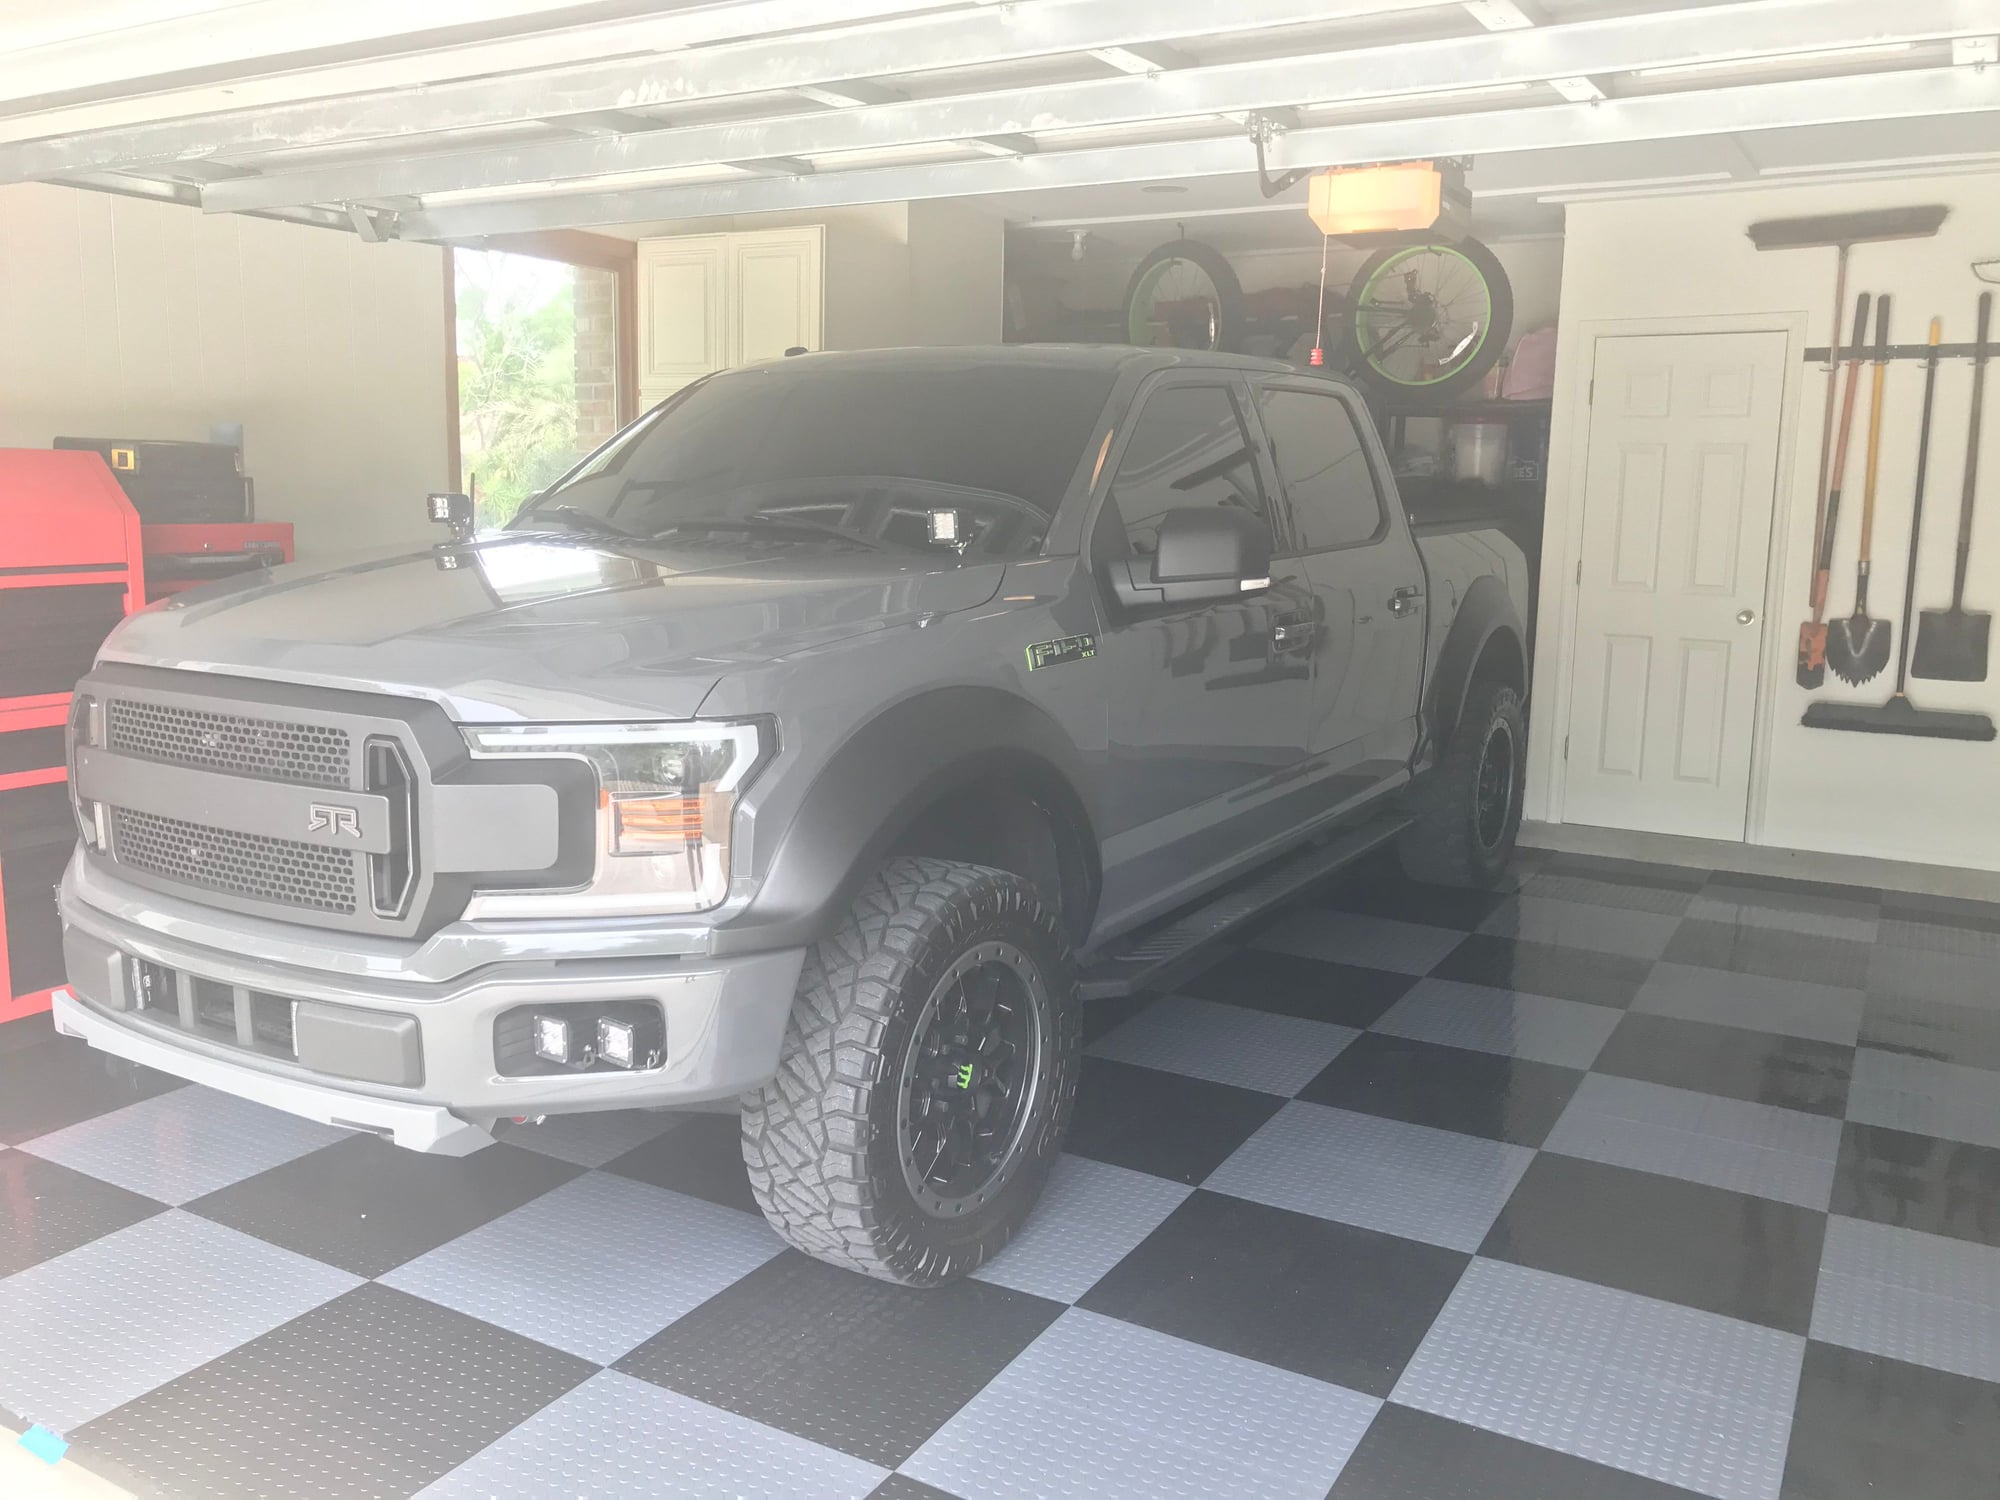 Wheel spacer size regrets - Page 2 - Ford F150 Forum - Community of